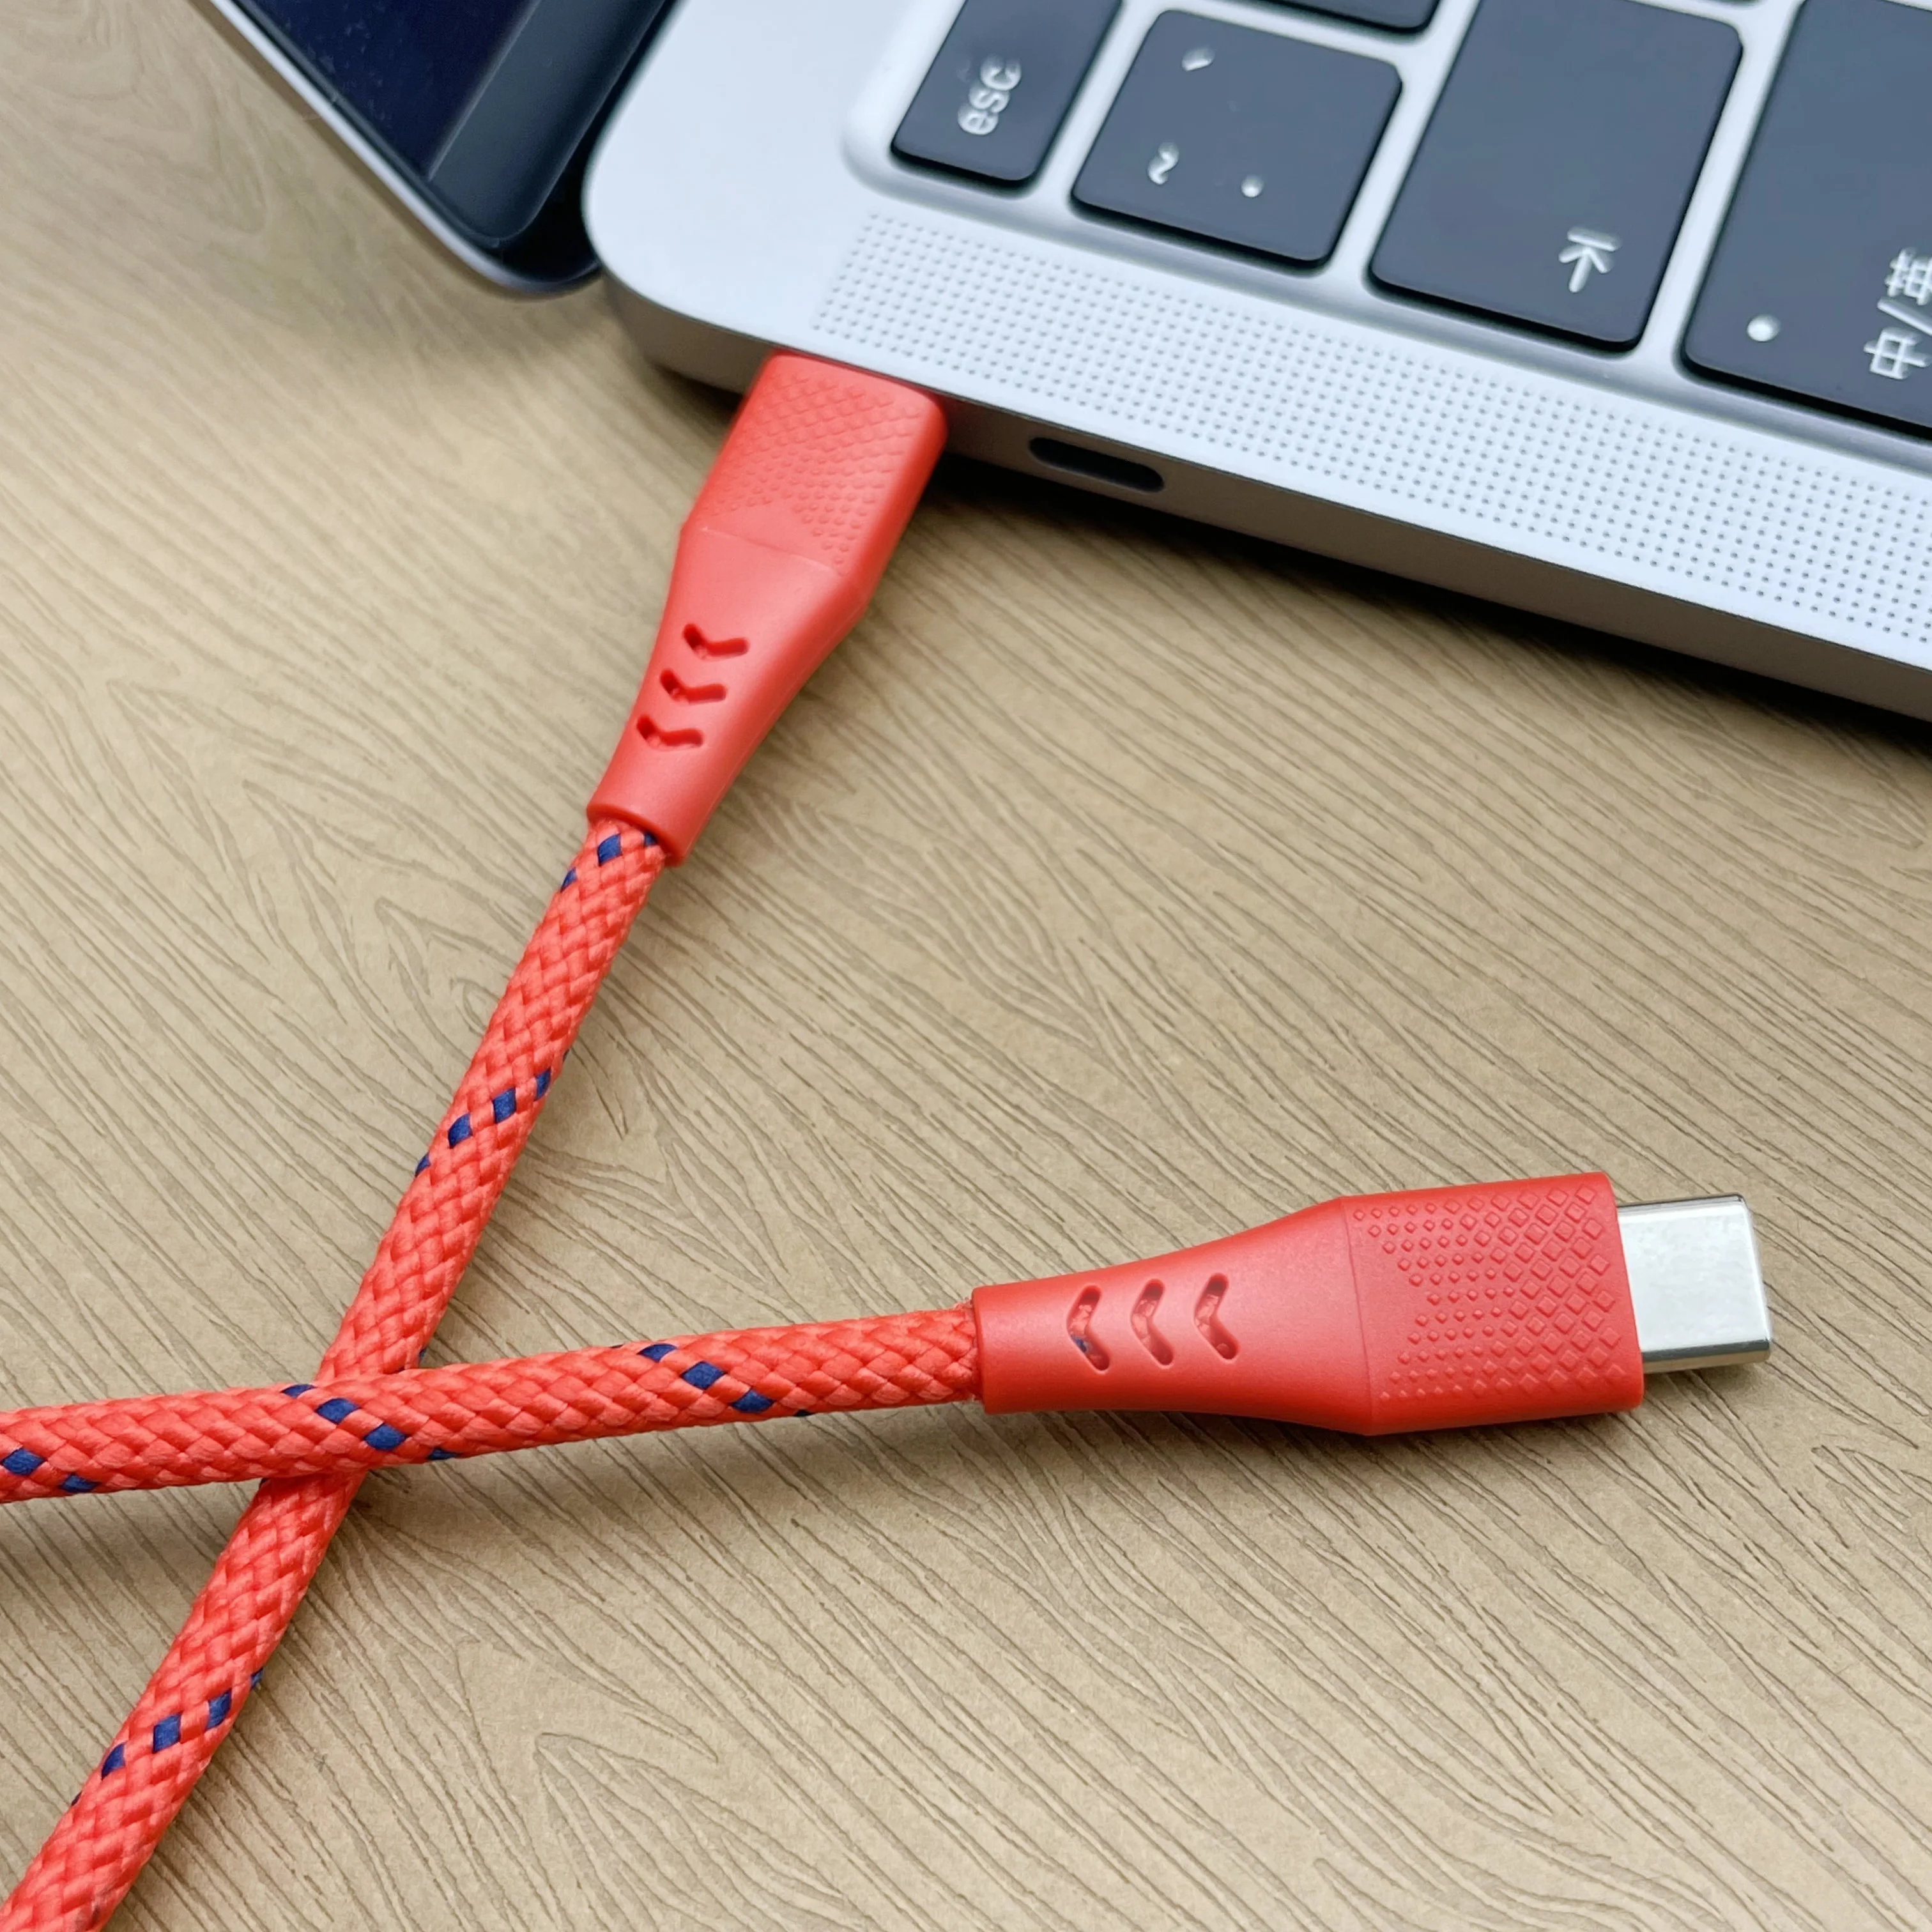 USB Type-c to USB-C 2.0 braided, 1M, for mobile charging cable data transfer, customizable length 2M, 3M